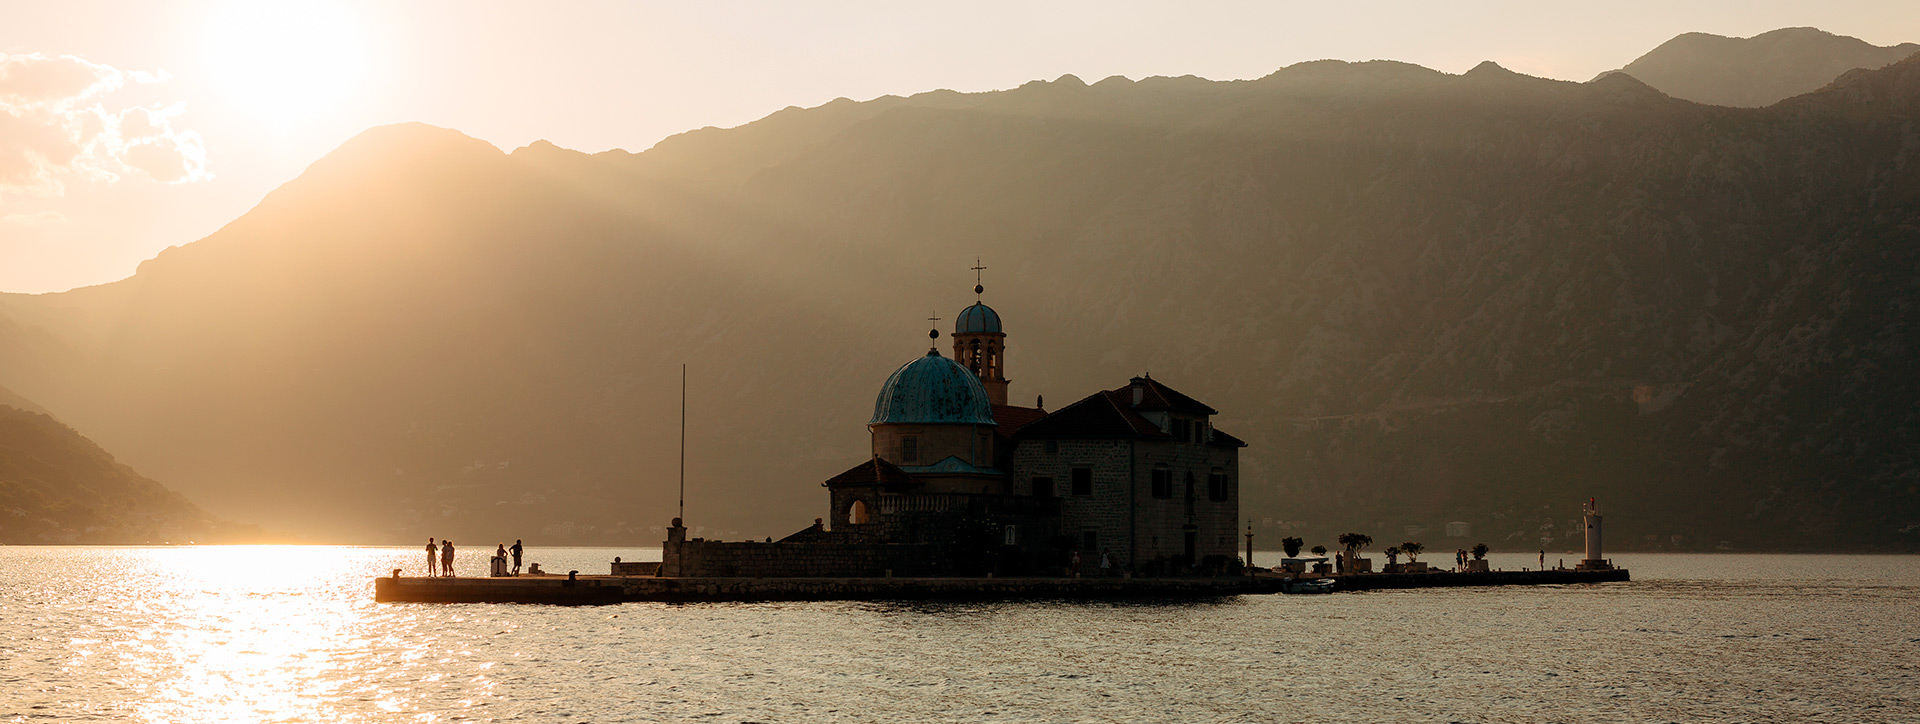 Gospa od Skrpjela - the Island of our lady on the Reef at sunset, in front of Perast, Montenegro - Montenegrin waters SimpleSail sailing routes